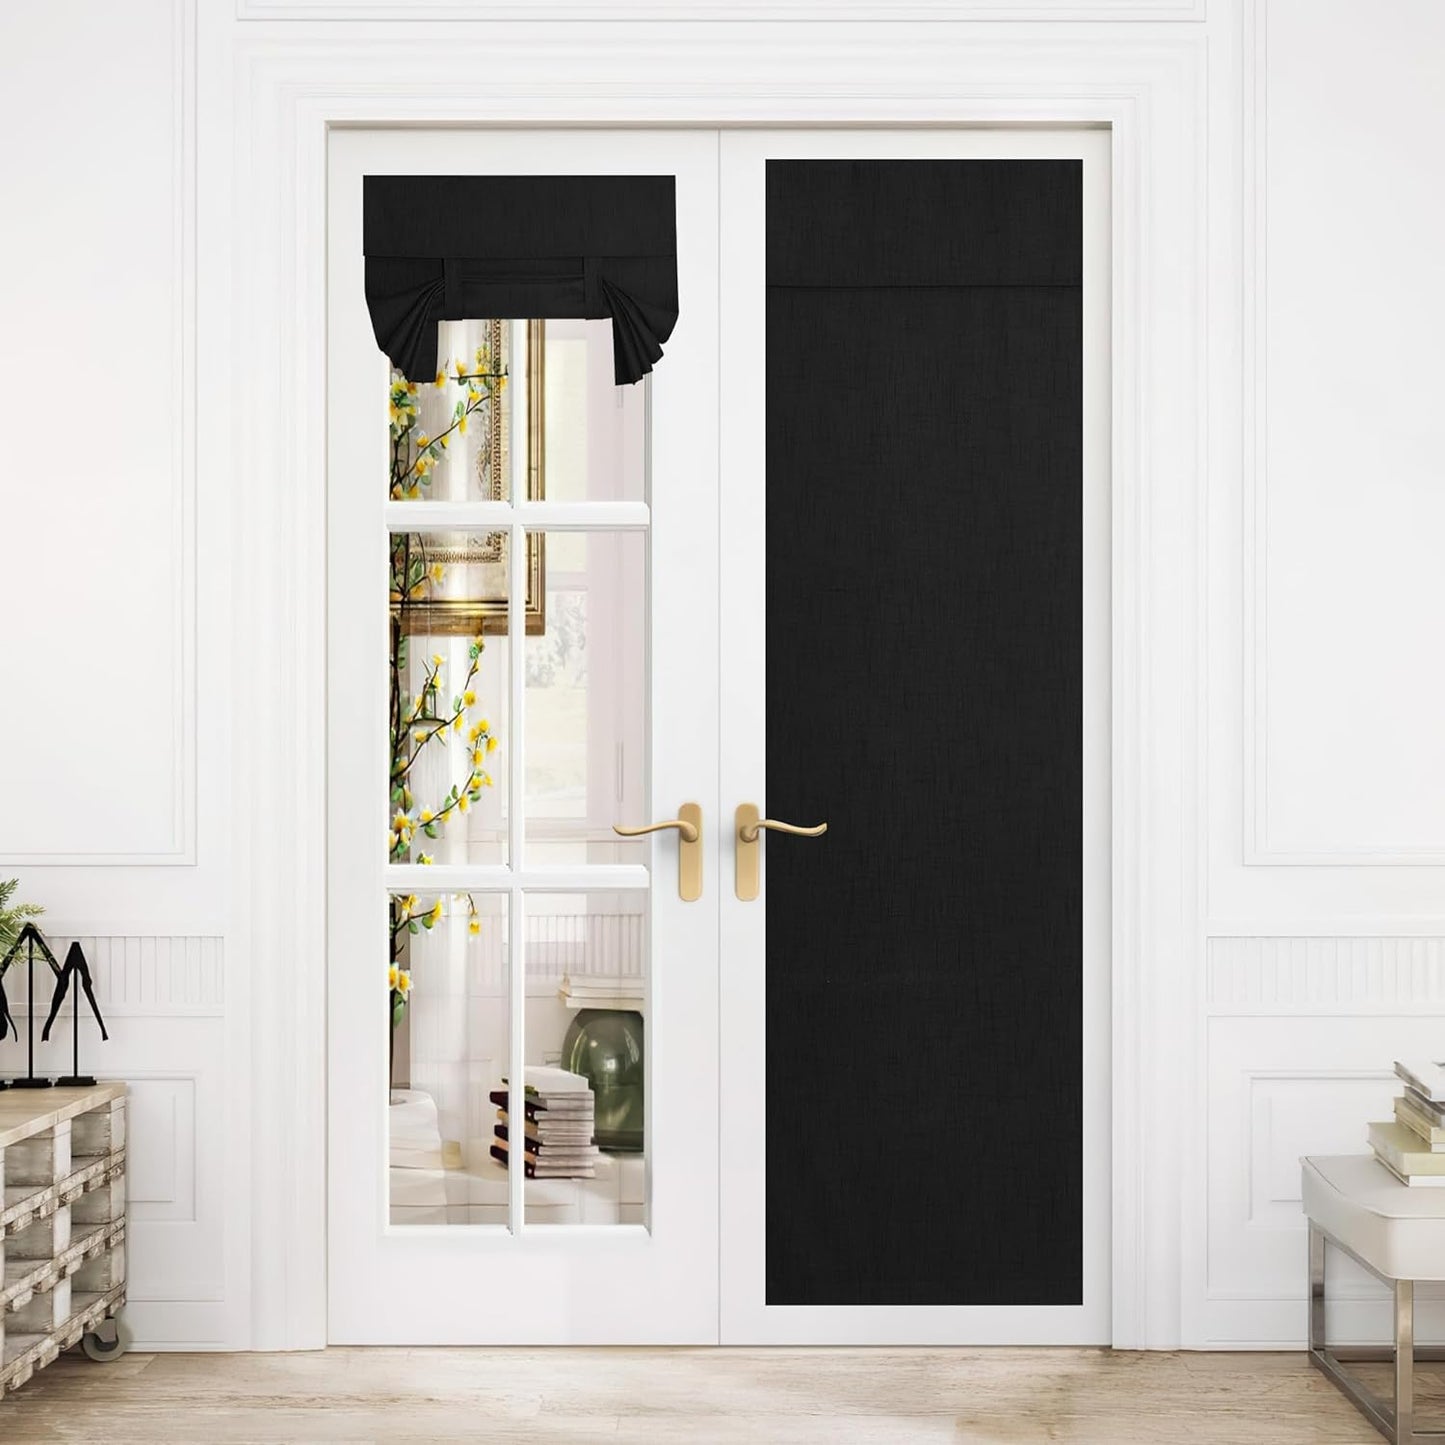 NICETOWN Linen Door Curtain for Door Window, Farmhouse French Door Curtain Shade for Kitchen Bathroom Energy Saving 100% Blackout Tie up Shade for Patio Sliding Glass, 1 Panel, Natural, 26" W X 72" L  NICETOWN Jet Black W26 X L80 